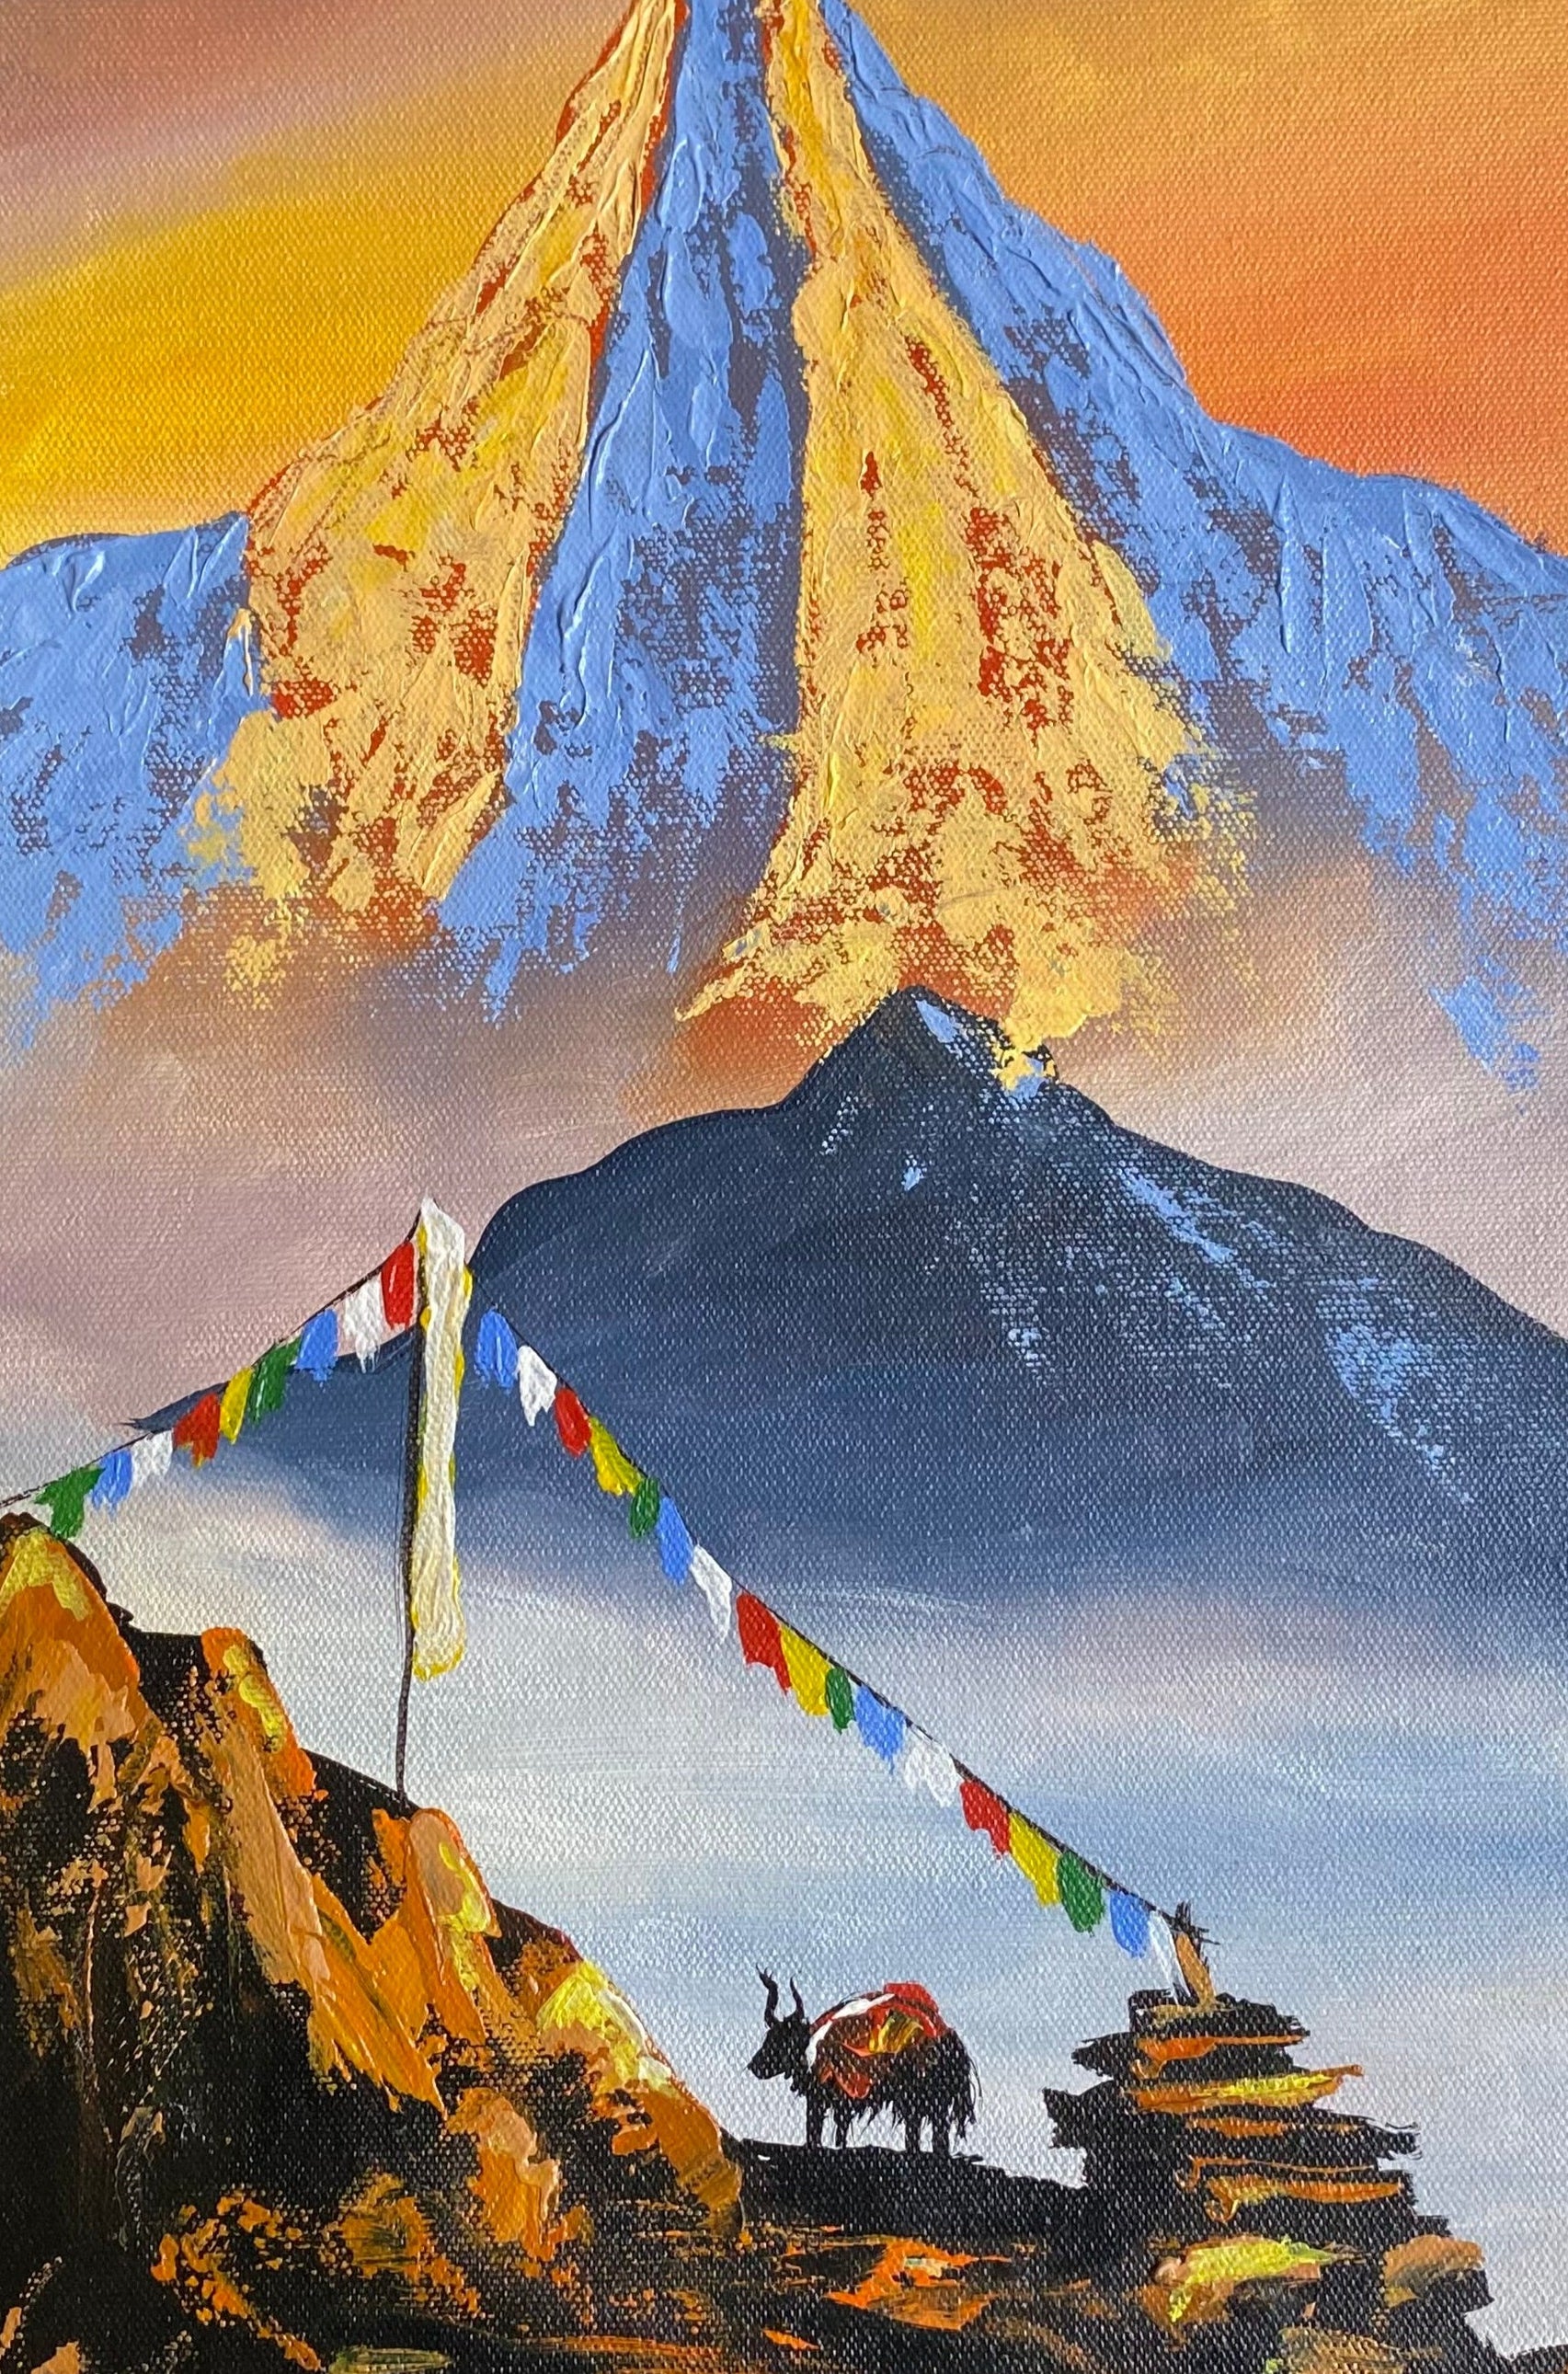 Oil Painting of Mount Everest.